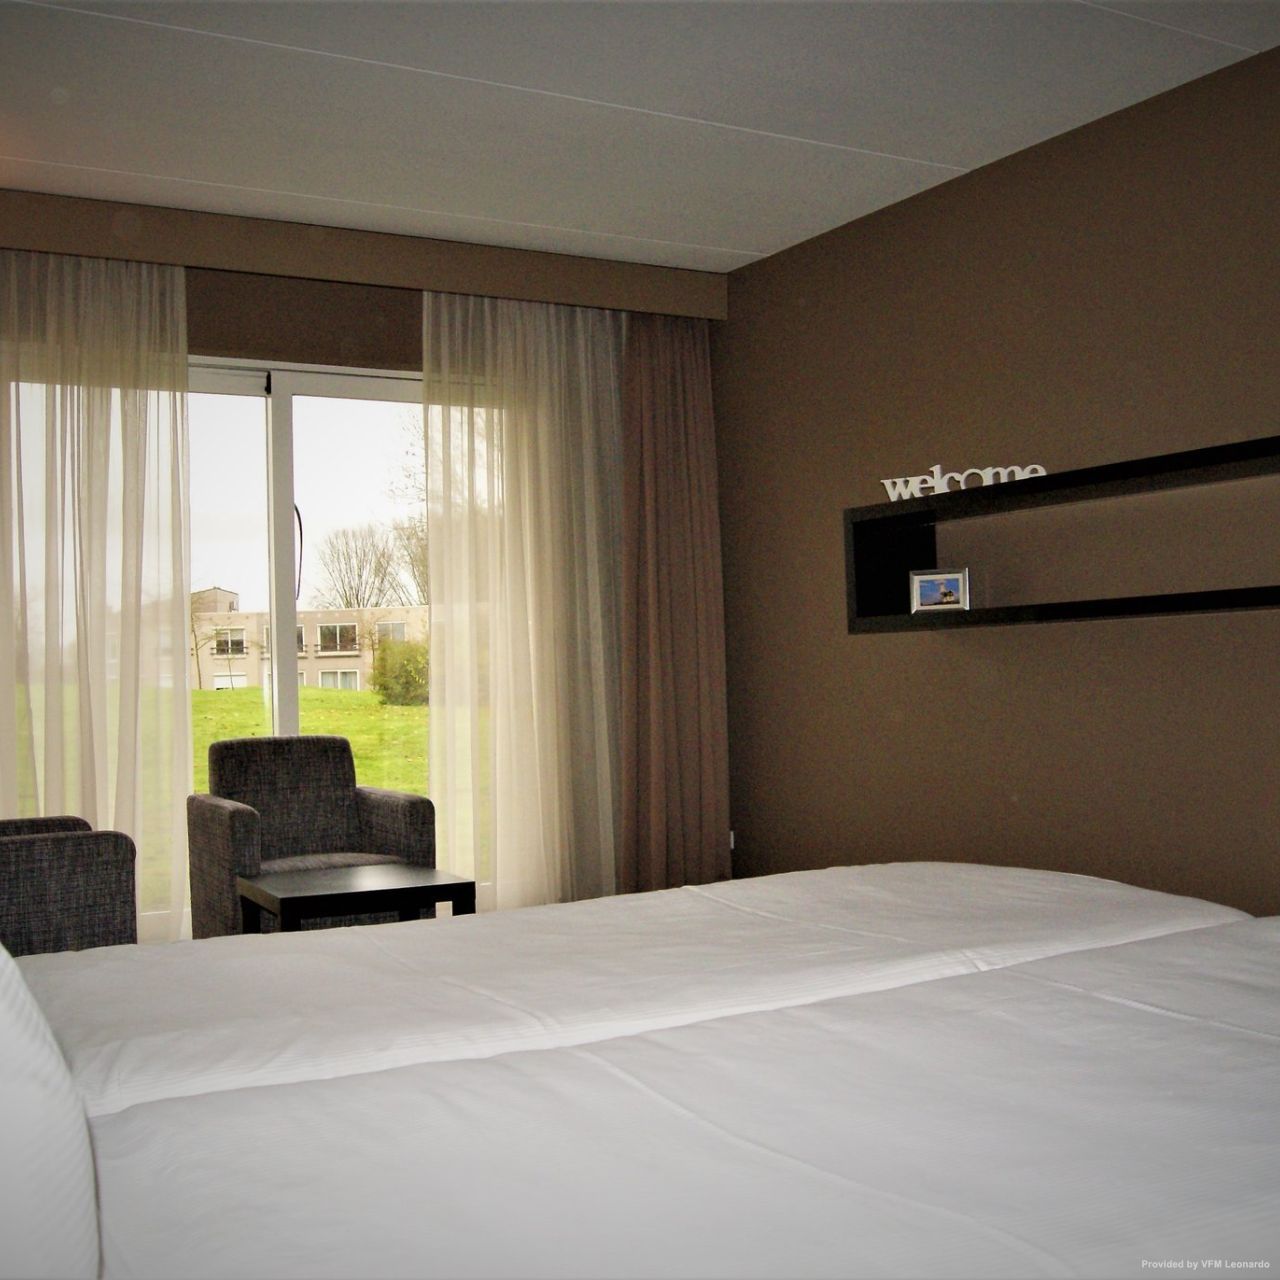 Hampshire Golfhotel Waterland in Purmerend - HOTEL DE